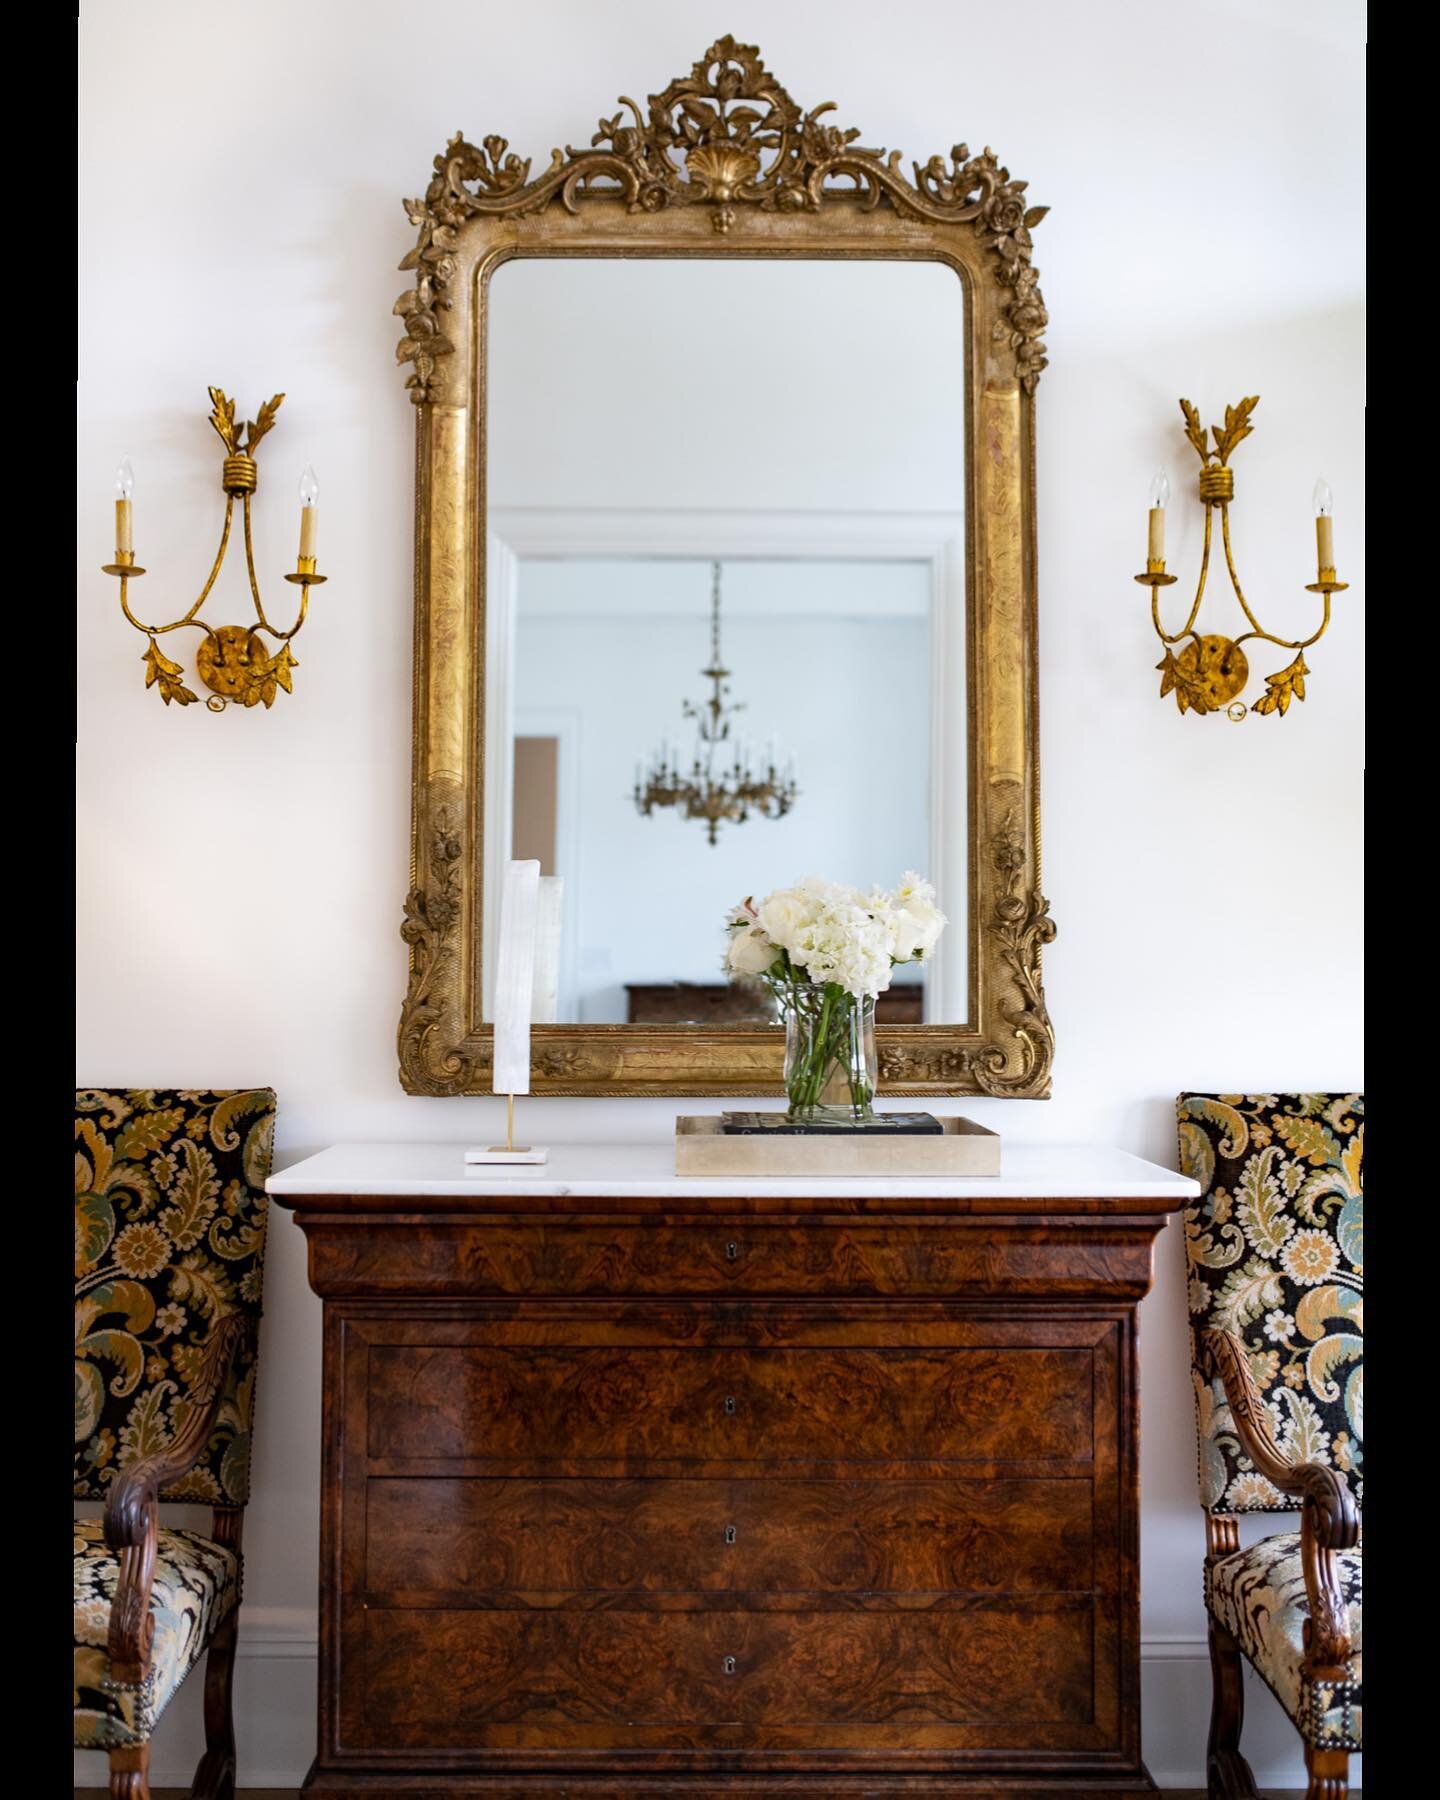 It&rsquo;s all about the HUNT! 
In this entry I found this 19c French antique mirror from @countrysideantiques . This was the first purchase for this room. I fell in love with the floral carving and gilt wood. The burled walnut Louis Phillipe chest w